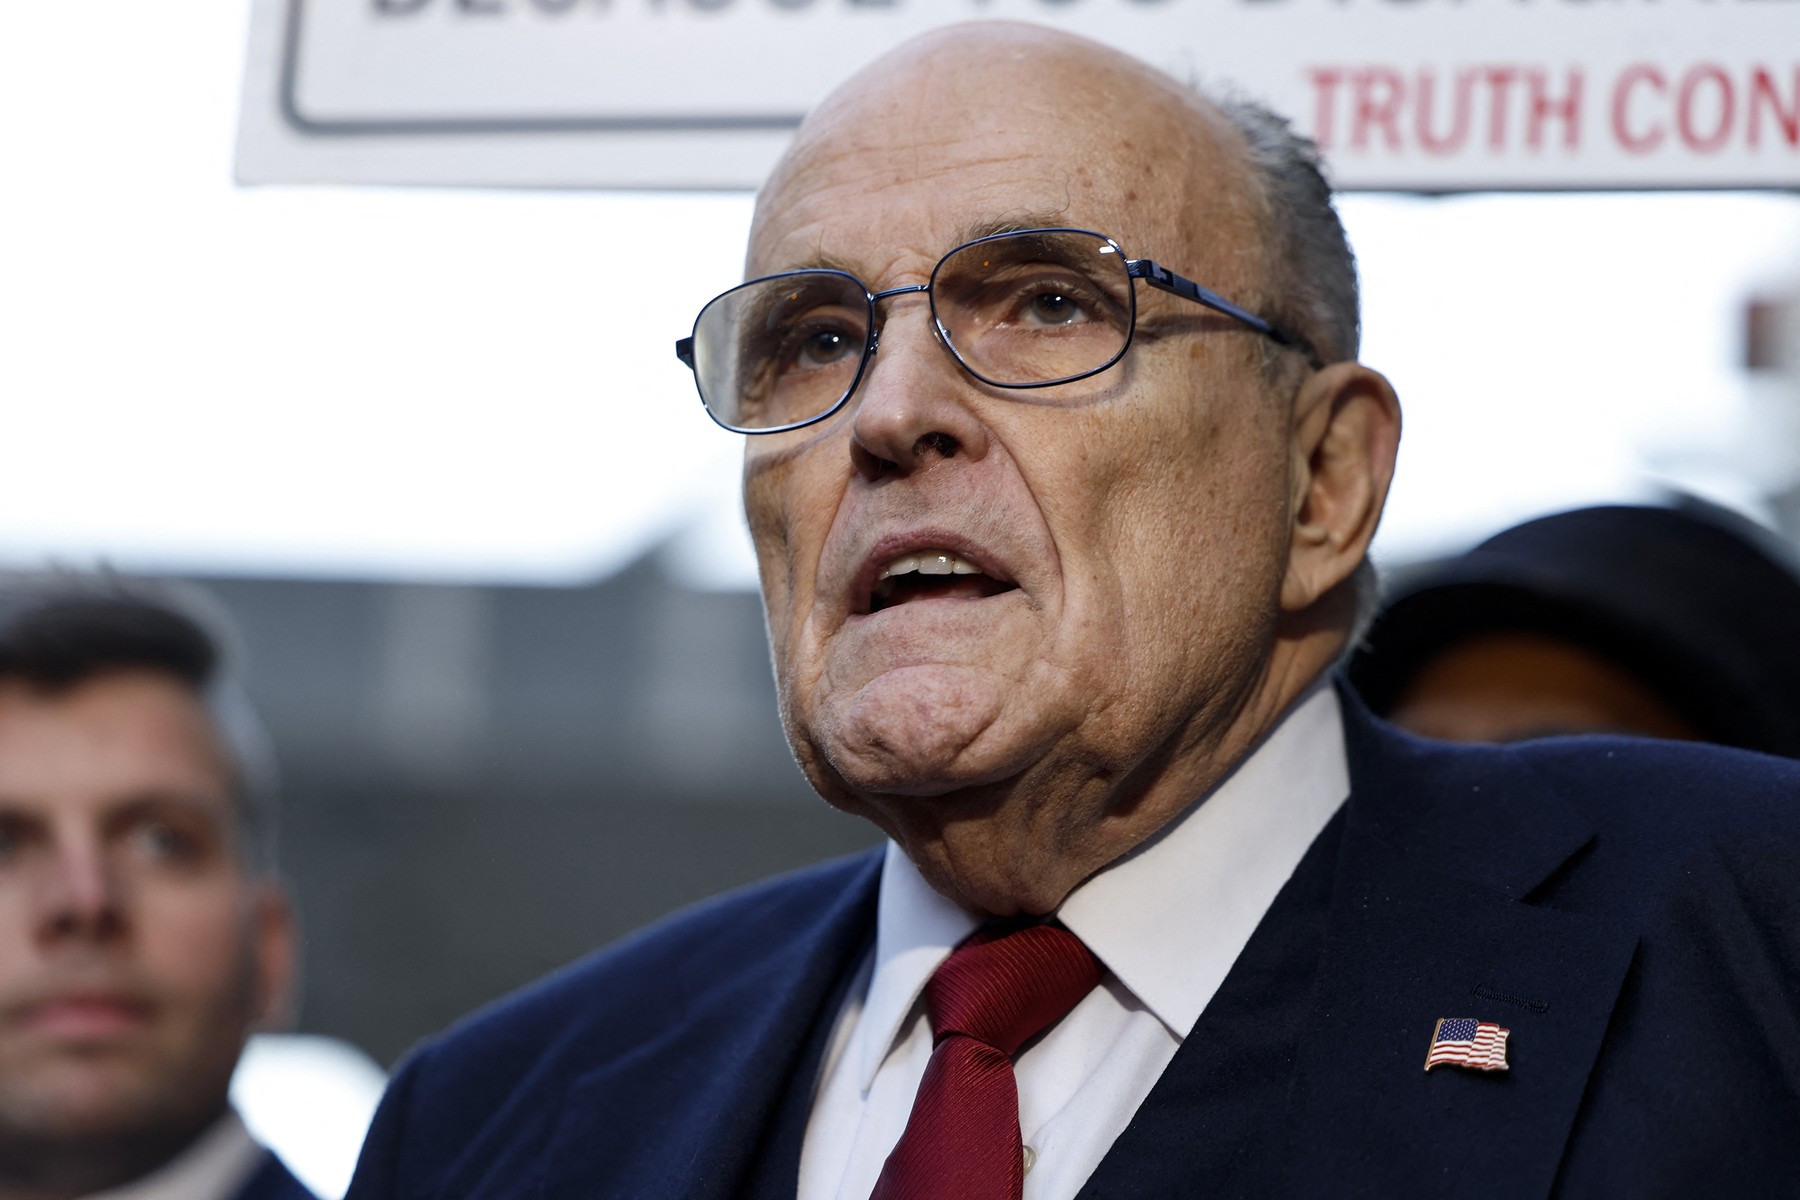 WASHINGTON, DC - DECEMBER 15: Rudy Giuliani, the former personal lawyer for former U.S. President Donald Trump, speaks with reporters outside of the E. Barrett Prettyman U.S. District Courthouse after a verdict was reached in his defamation jury trial on December 15, 2023 in Washington, DC. A jury has ordered Giuliani to pay $148 million in damages to Fulton County election workers Ruby Freeman and Shaye Moss.   Anna Moneymaker,Image: 829851583, License: Rights-managed, Restrictions: , Model Release: no, Credit line: Anna Moneymaker / Getty images / Profimedia